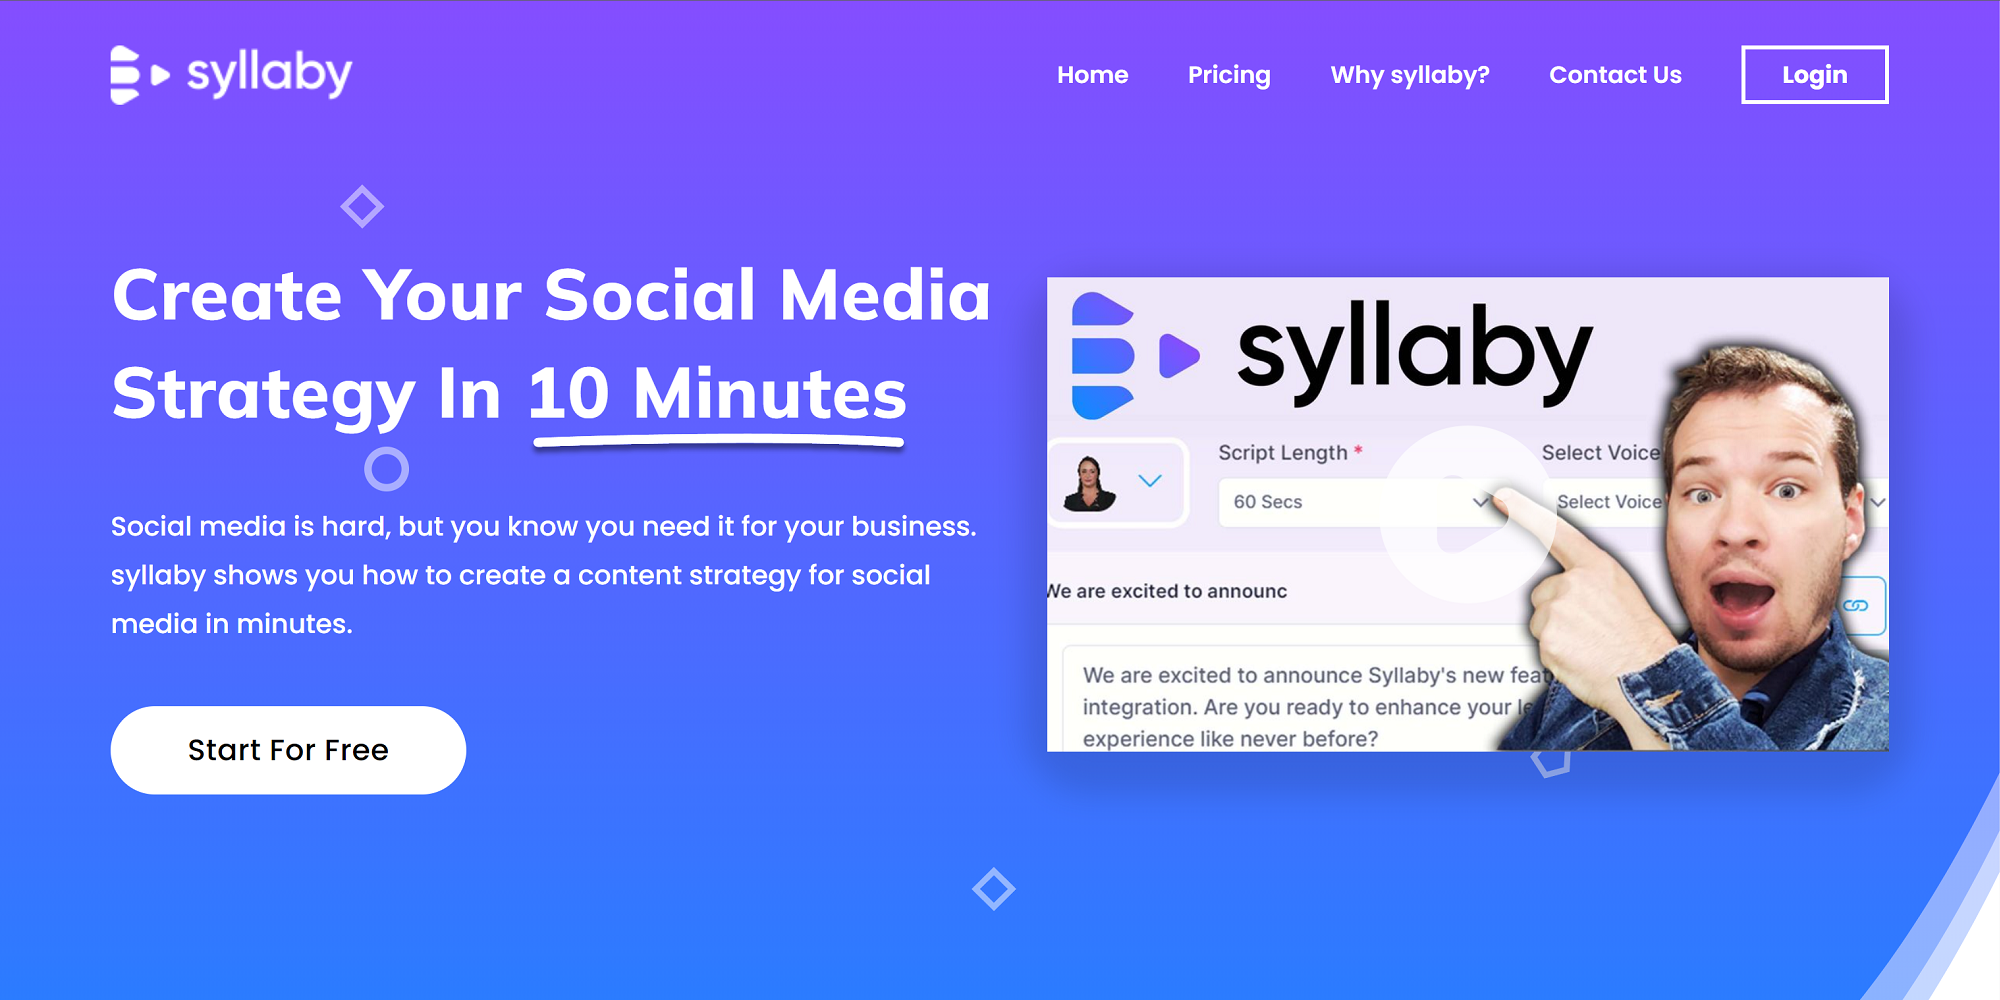 syllaby-io-review-austin-armstrong